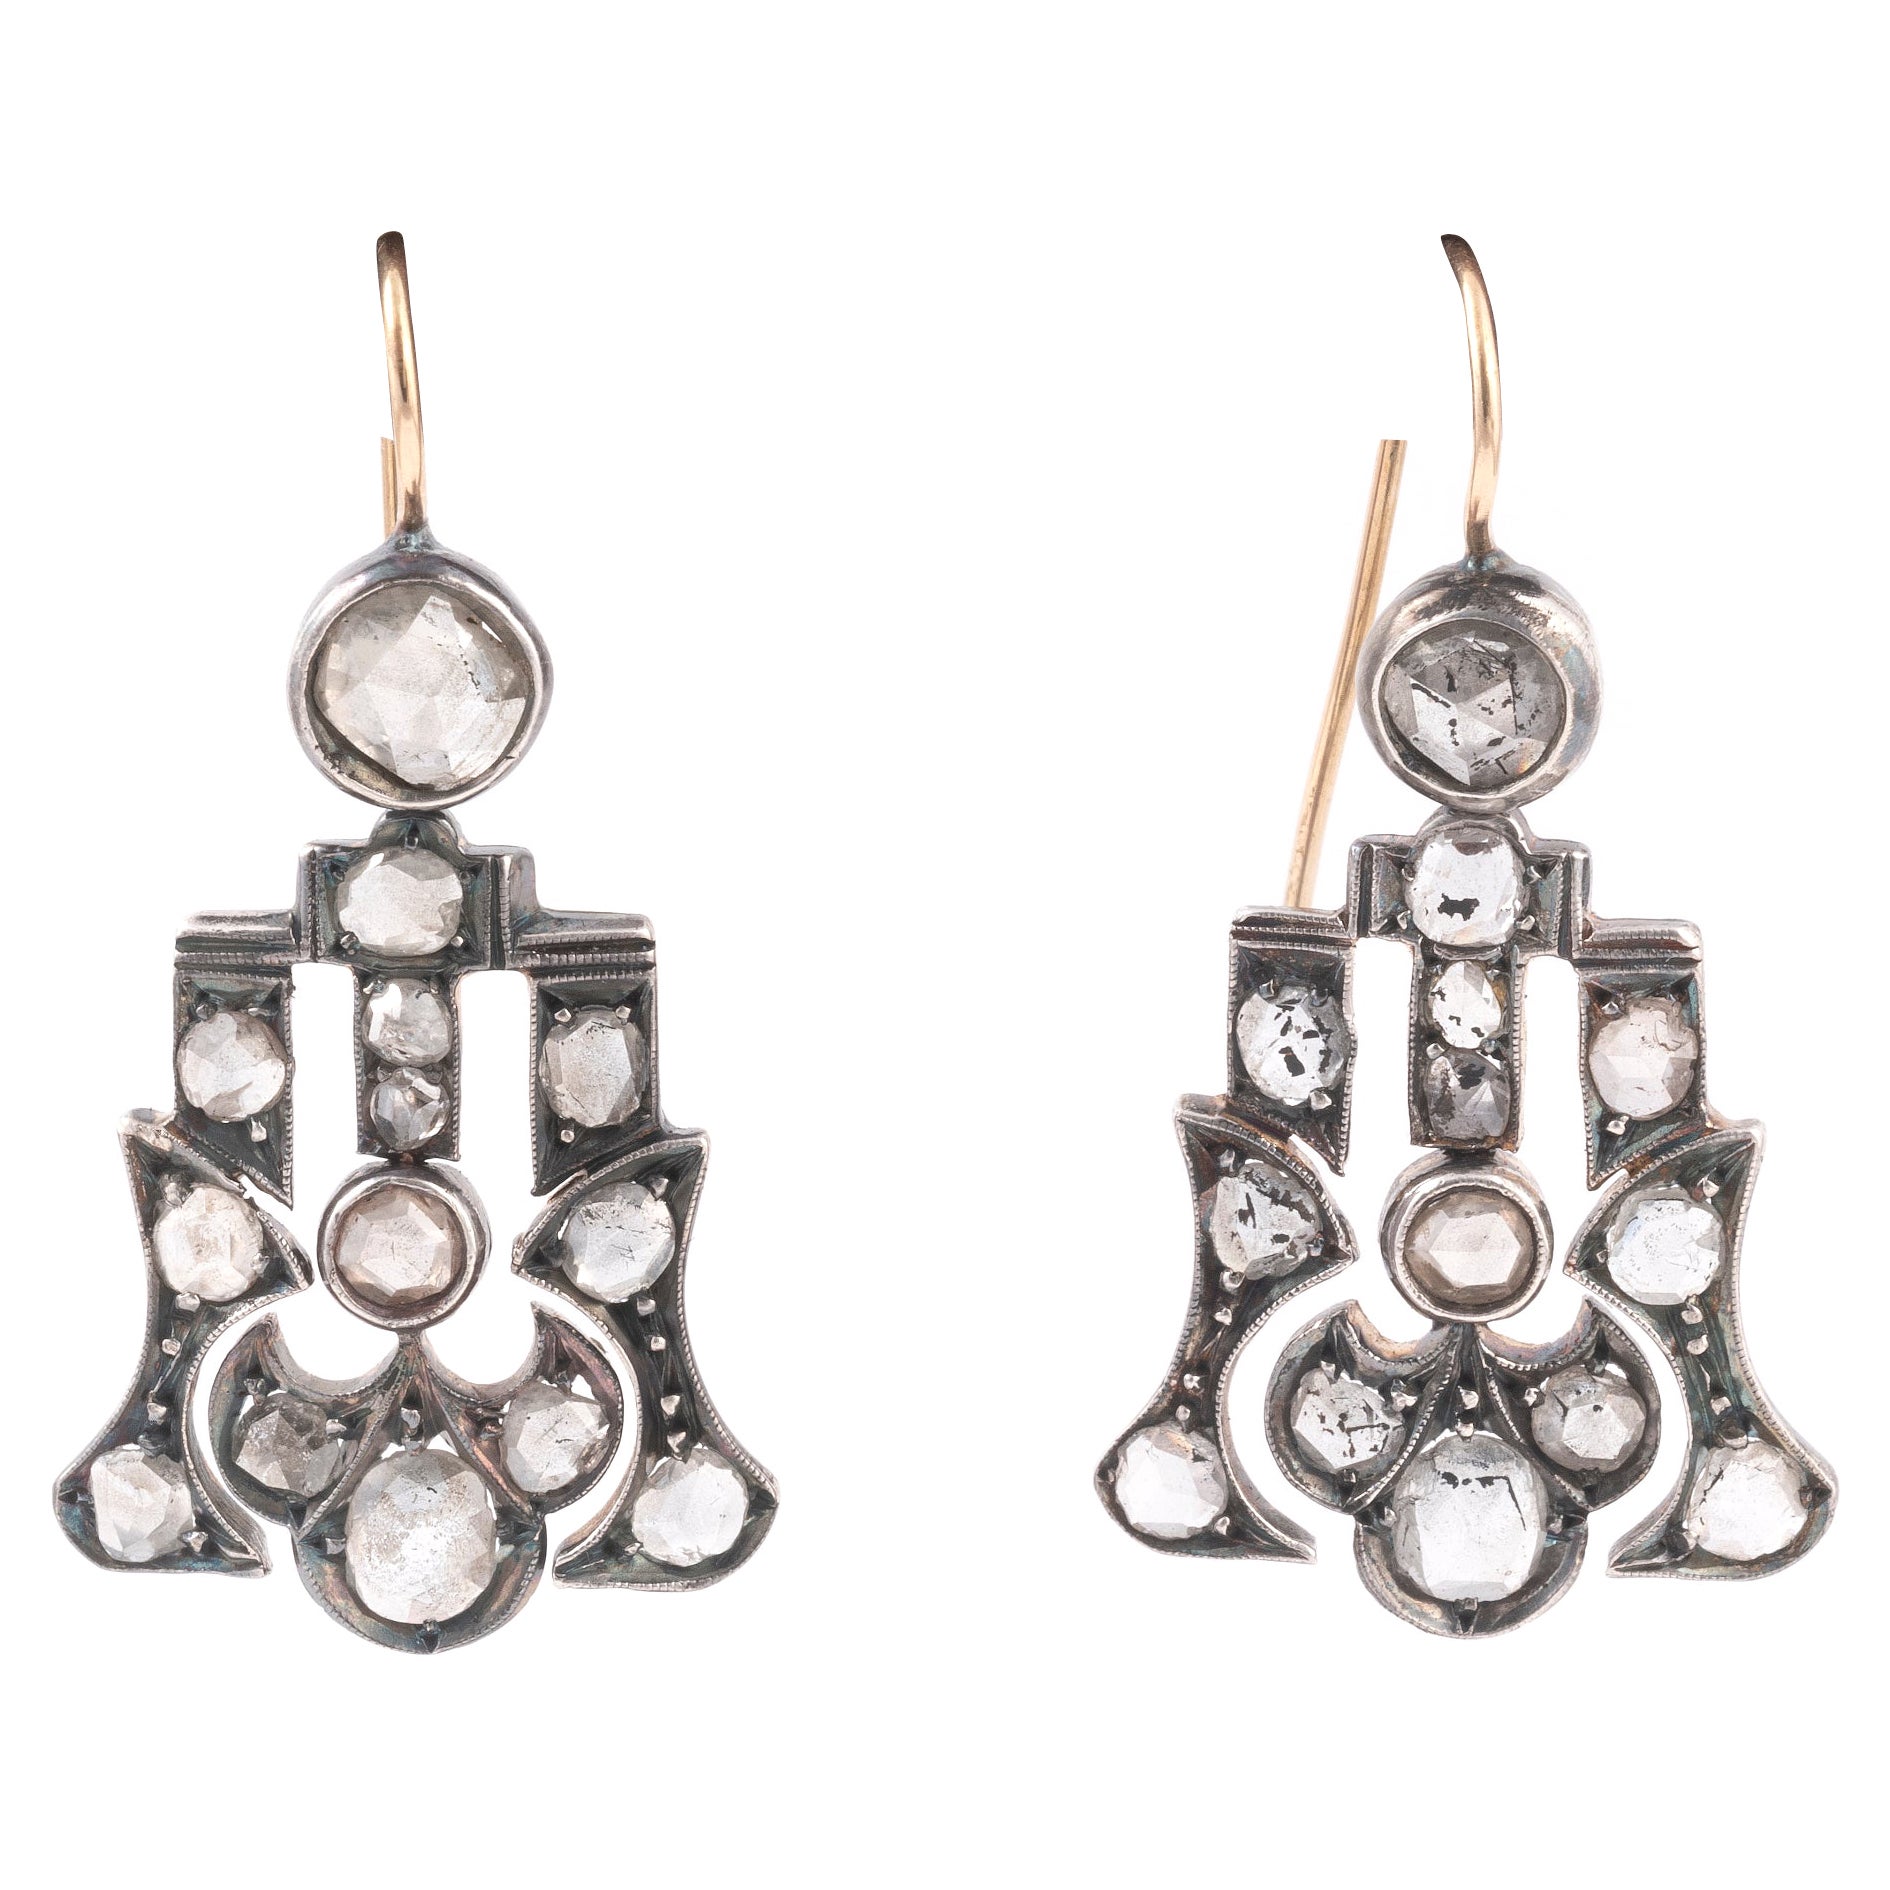 Antique Rose Cut Diamonds Silver and Gold Earrings 1890 ca.